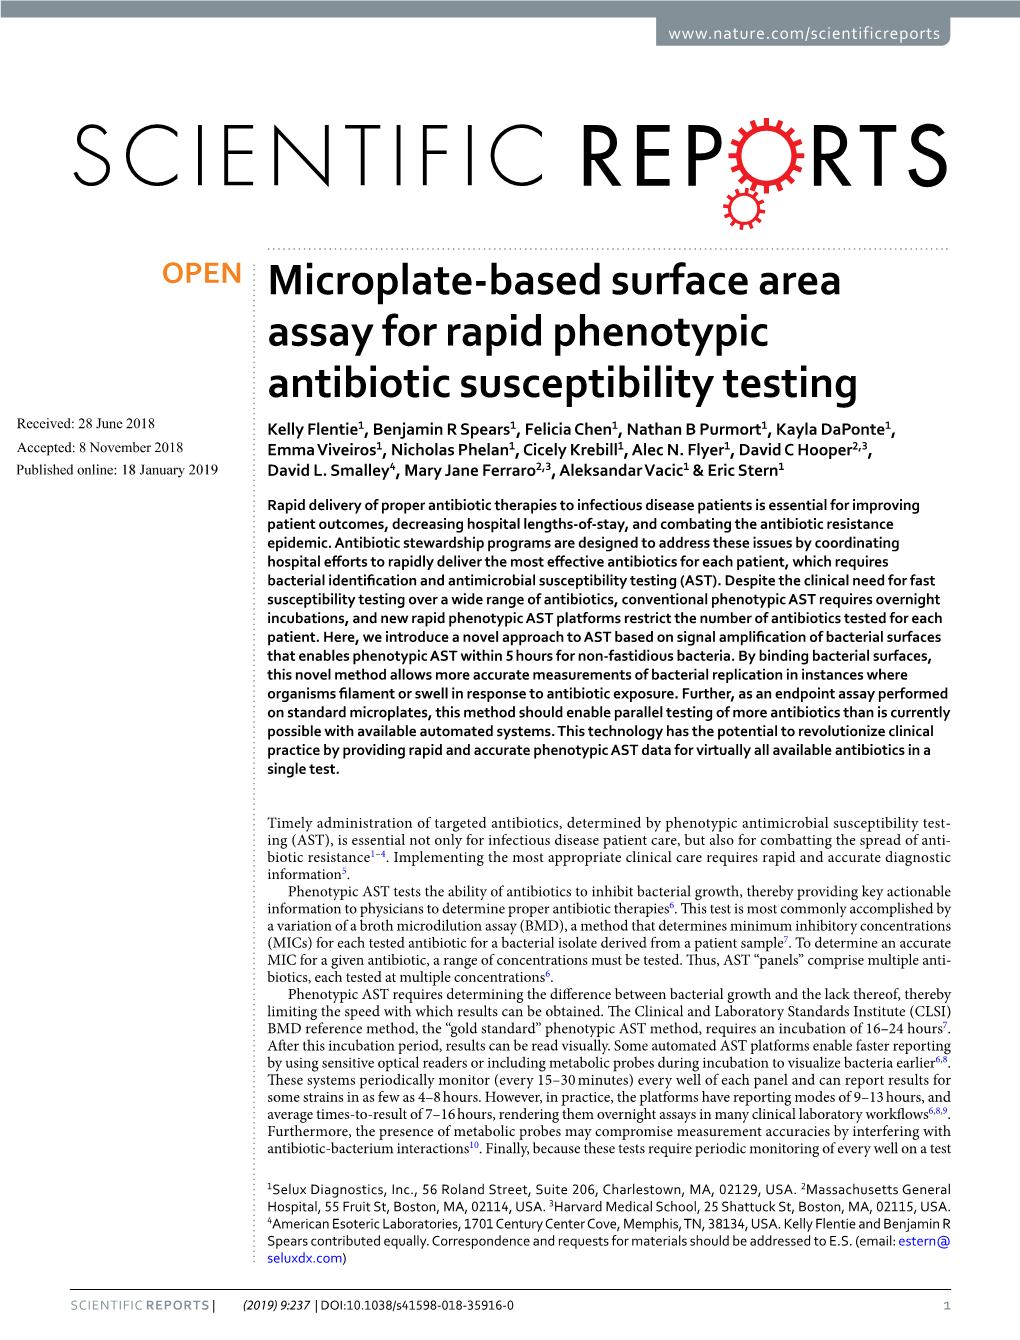 Microplate-Based Surface Area Assay for Rapid Phenotypic Antibiotic